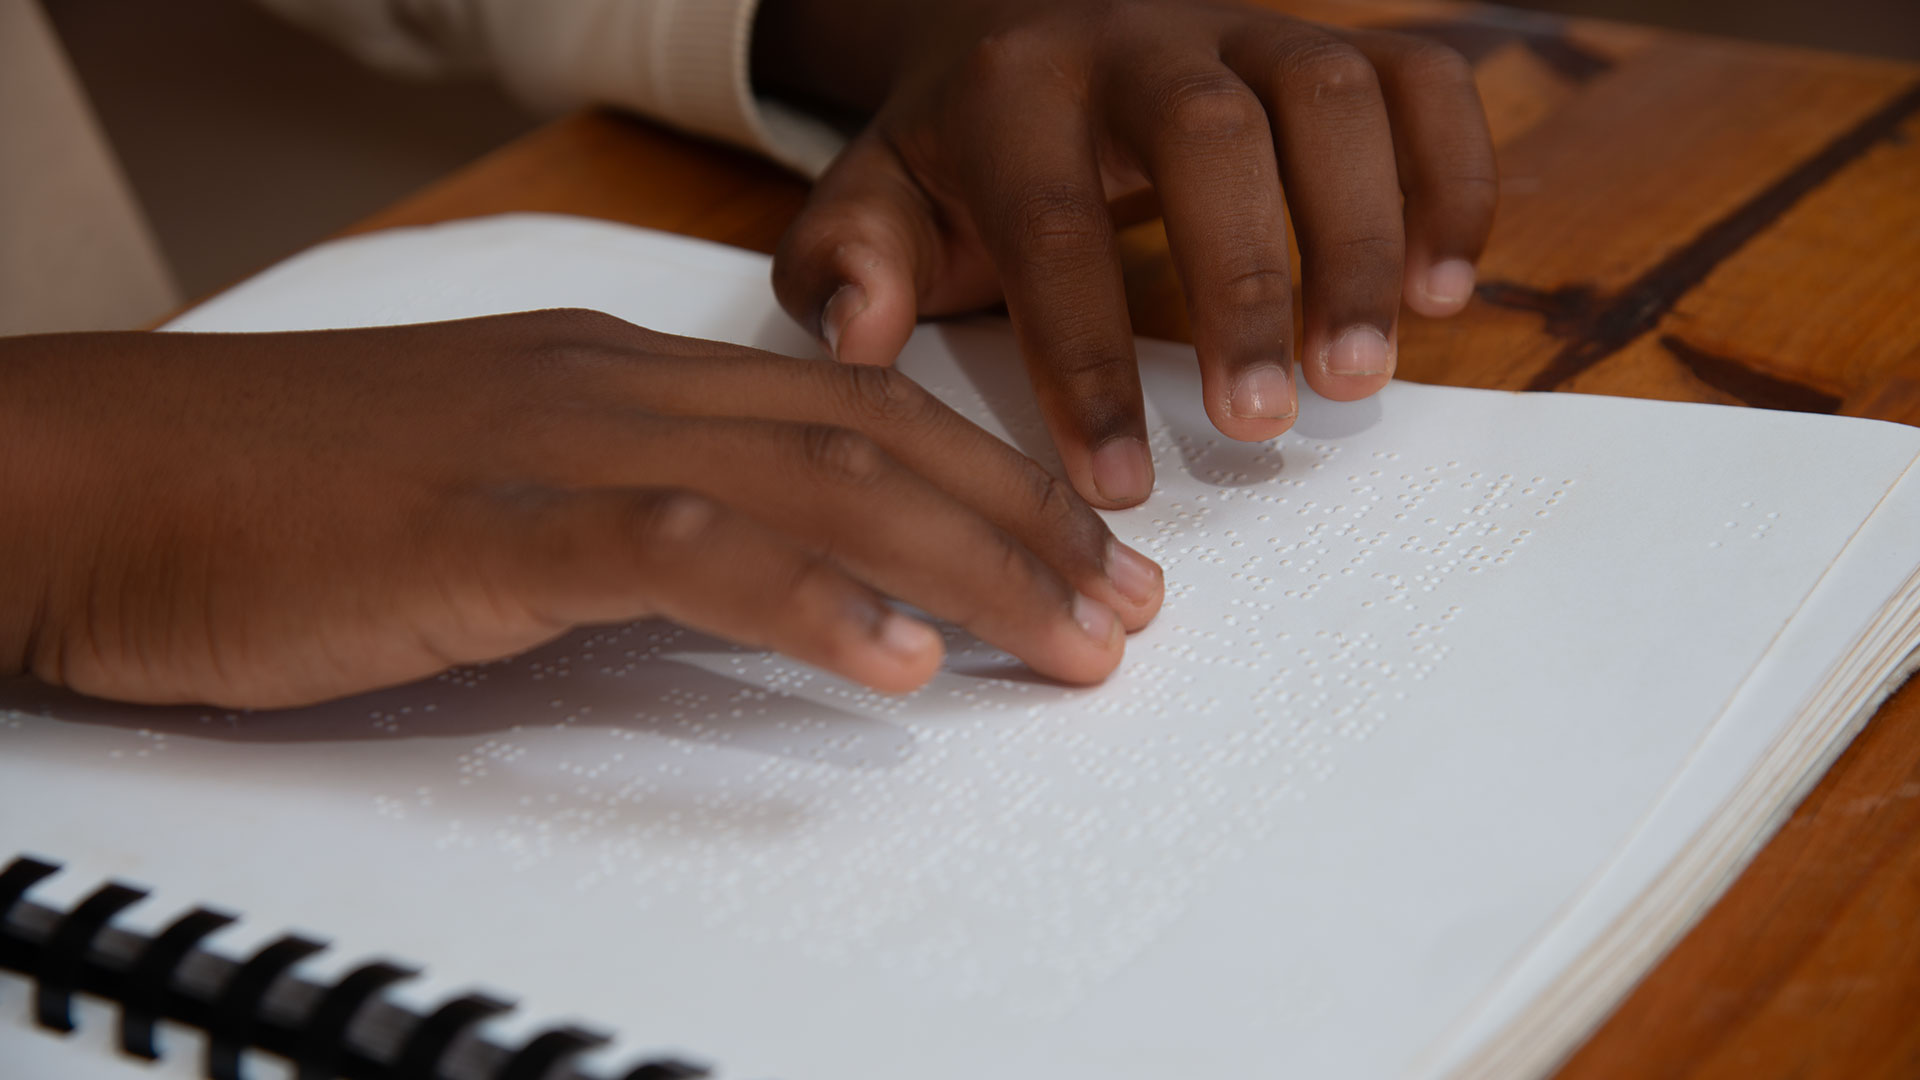 Child's hands reading a document in braille.